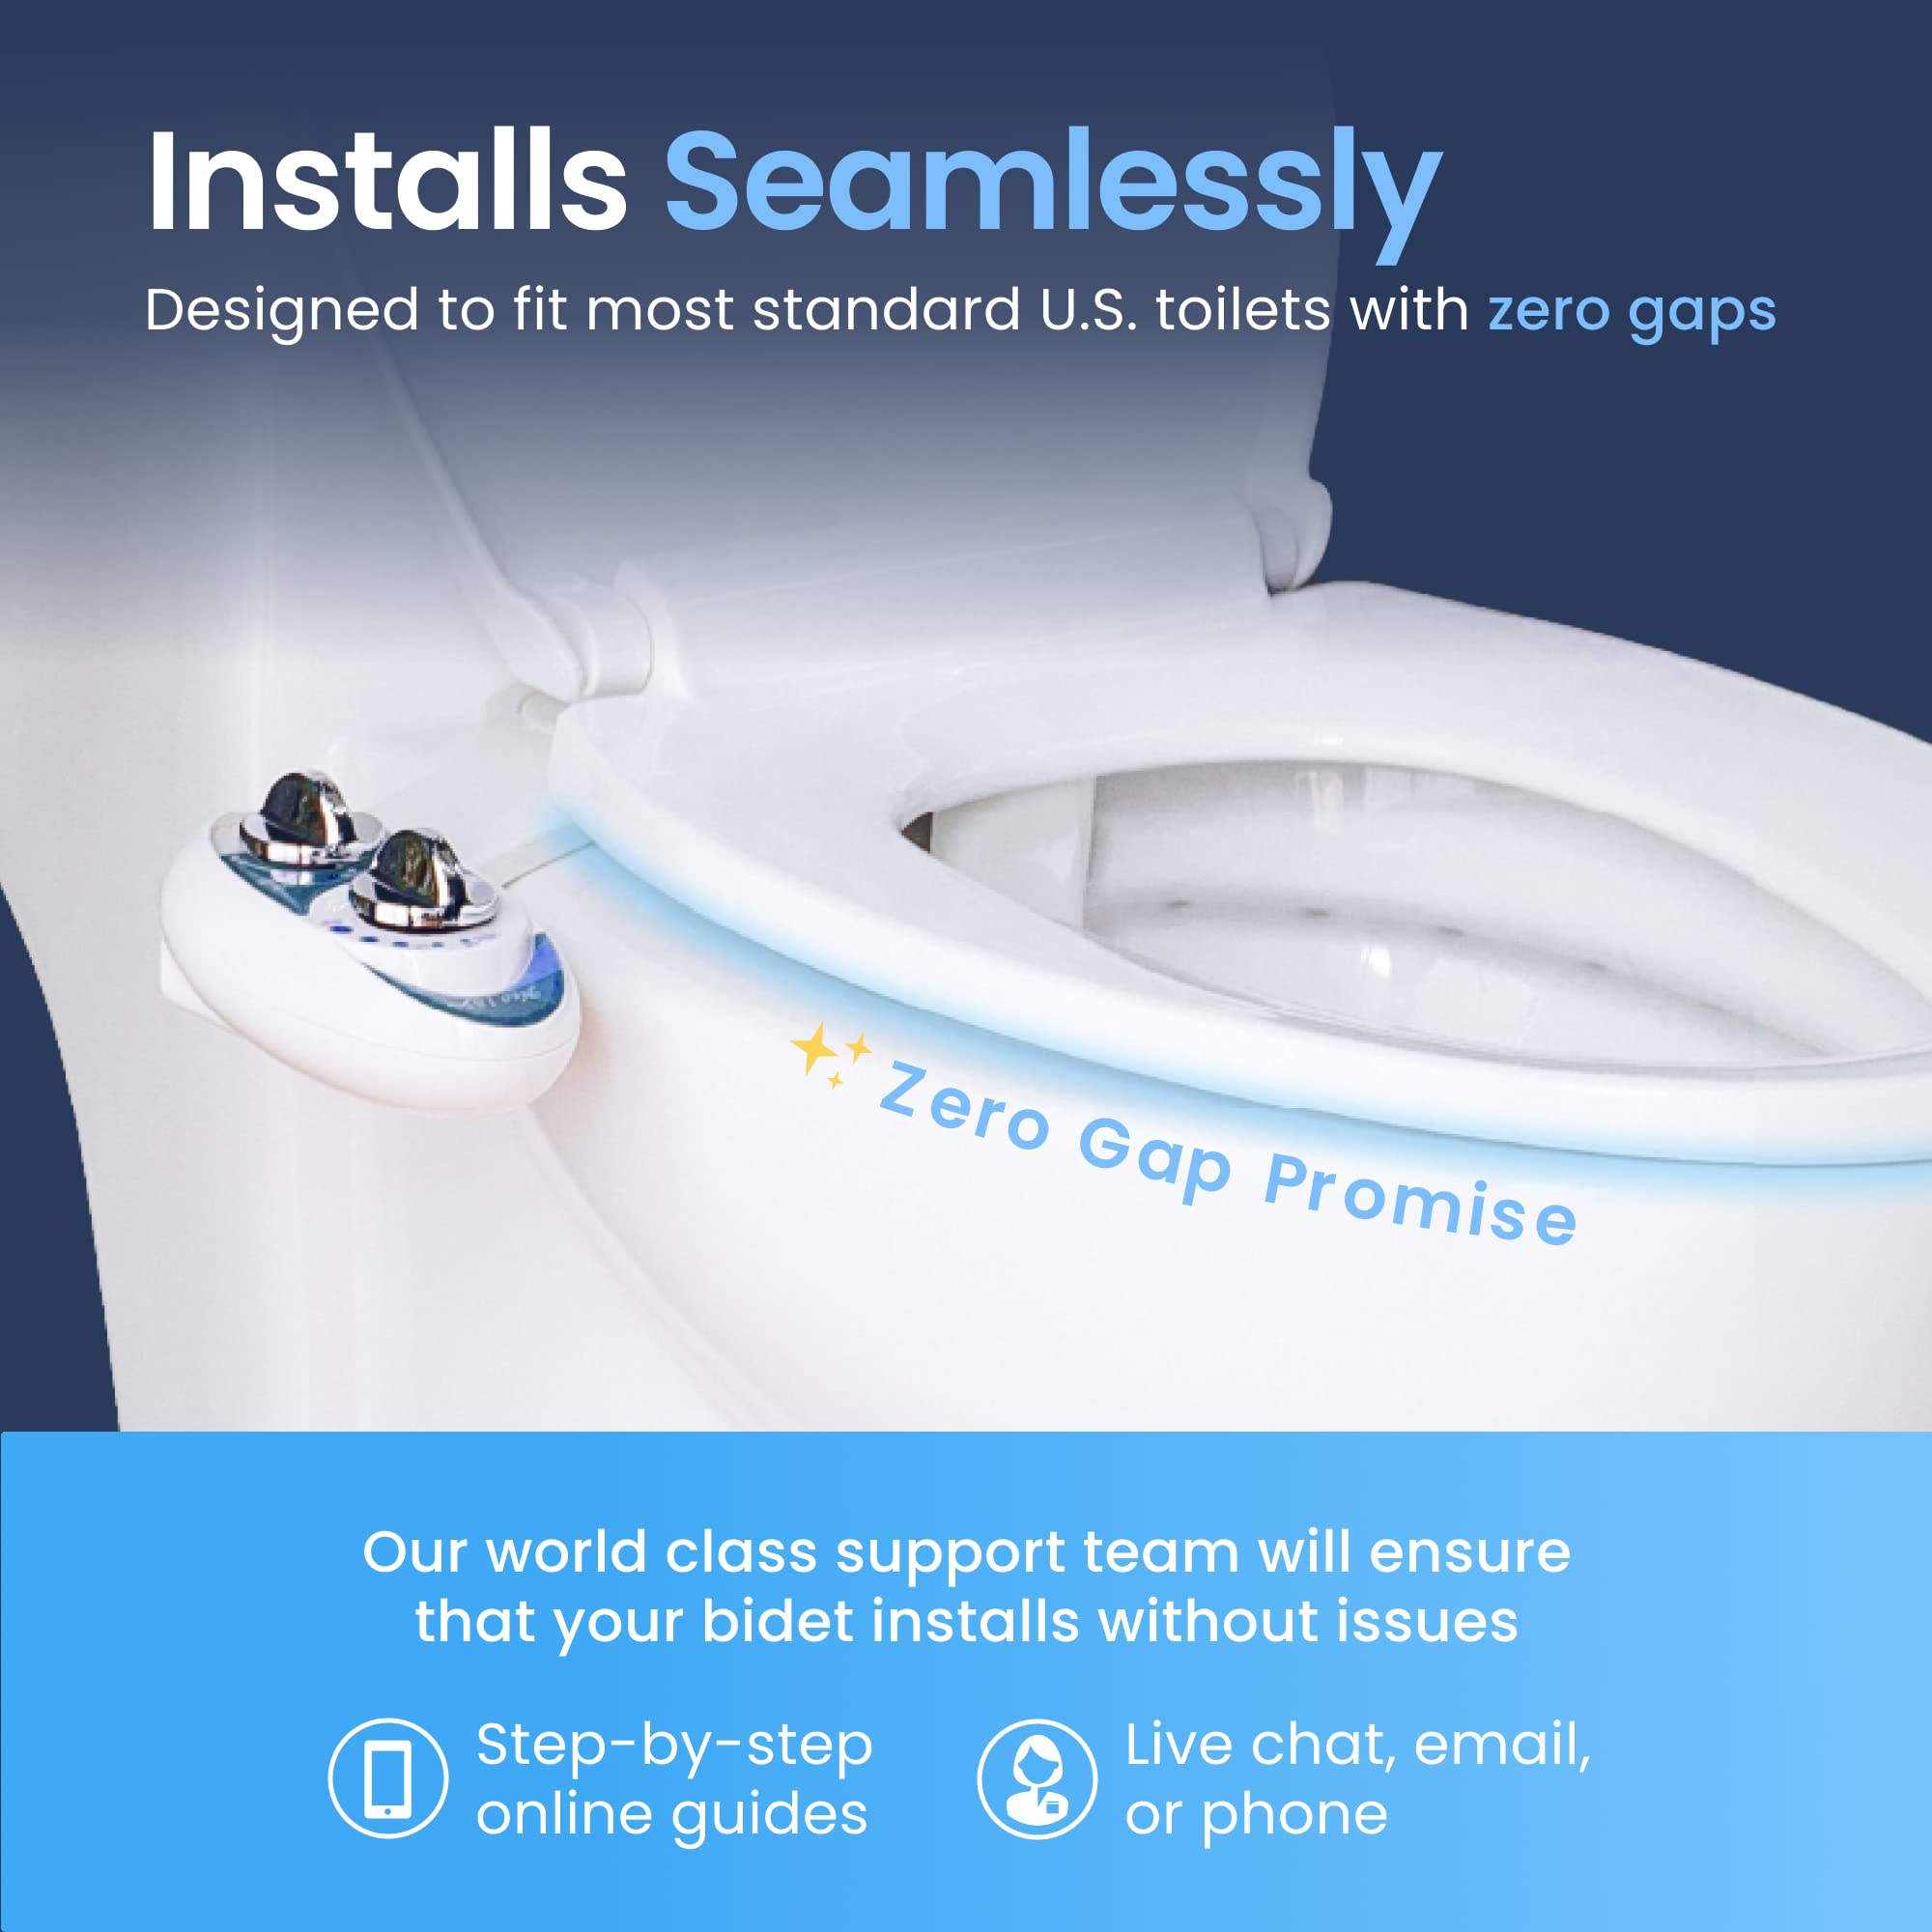 LUXE Bidet NEO 320 - Hot and Cold Water, Self-Cleaning, Dual Nozzle, Non-Electric Bidet Attachment for Toilet Seat, Adjustable Water Pressure, Rear and Feminine Wash, Lever Control (Blue), 13.5 x 7 x 3 inches